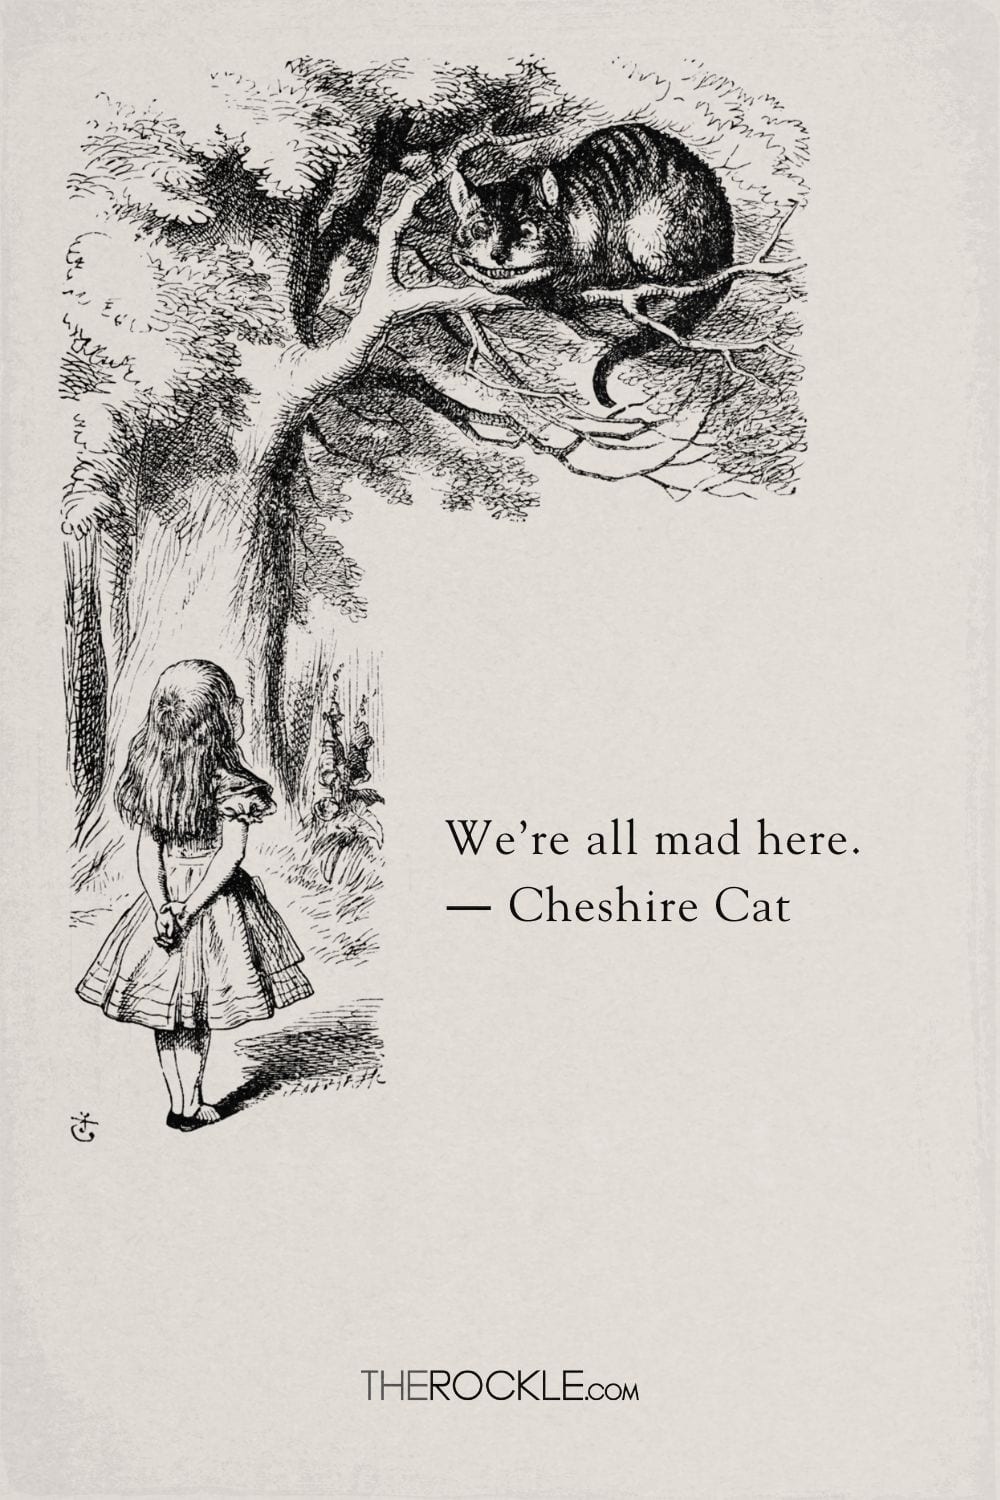 "We're all mad here" quote from Alice in Wonderland